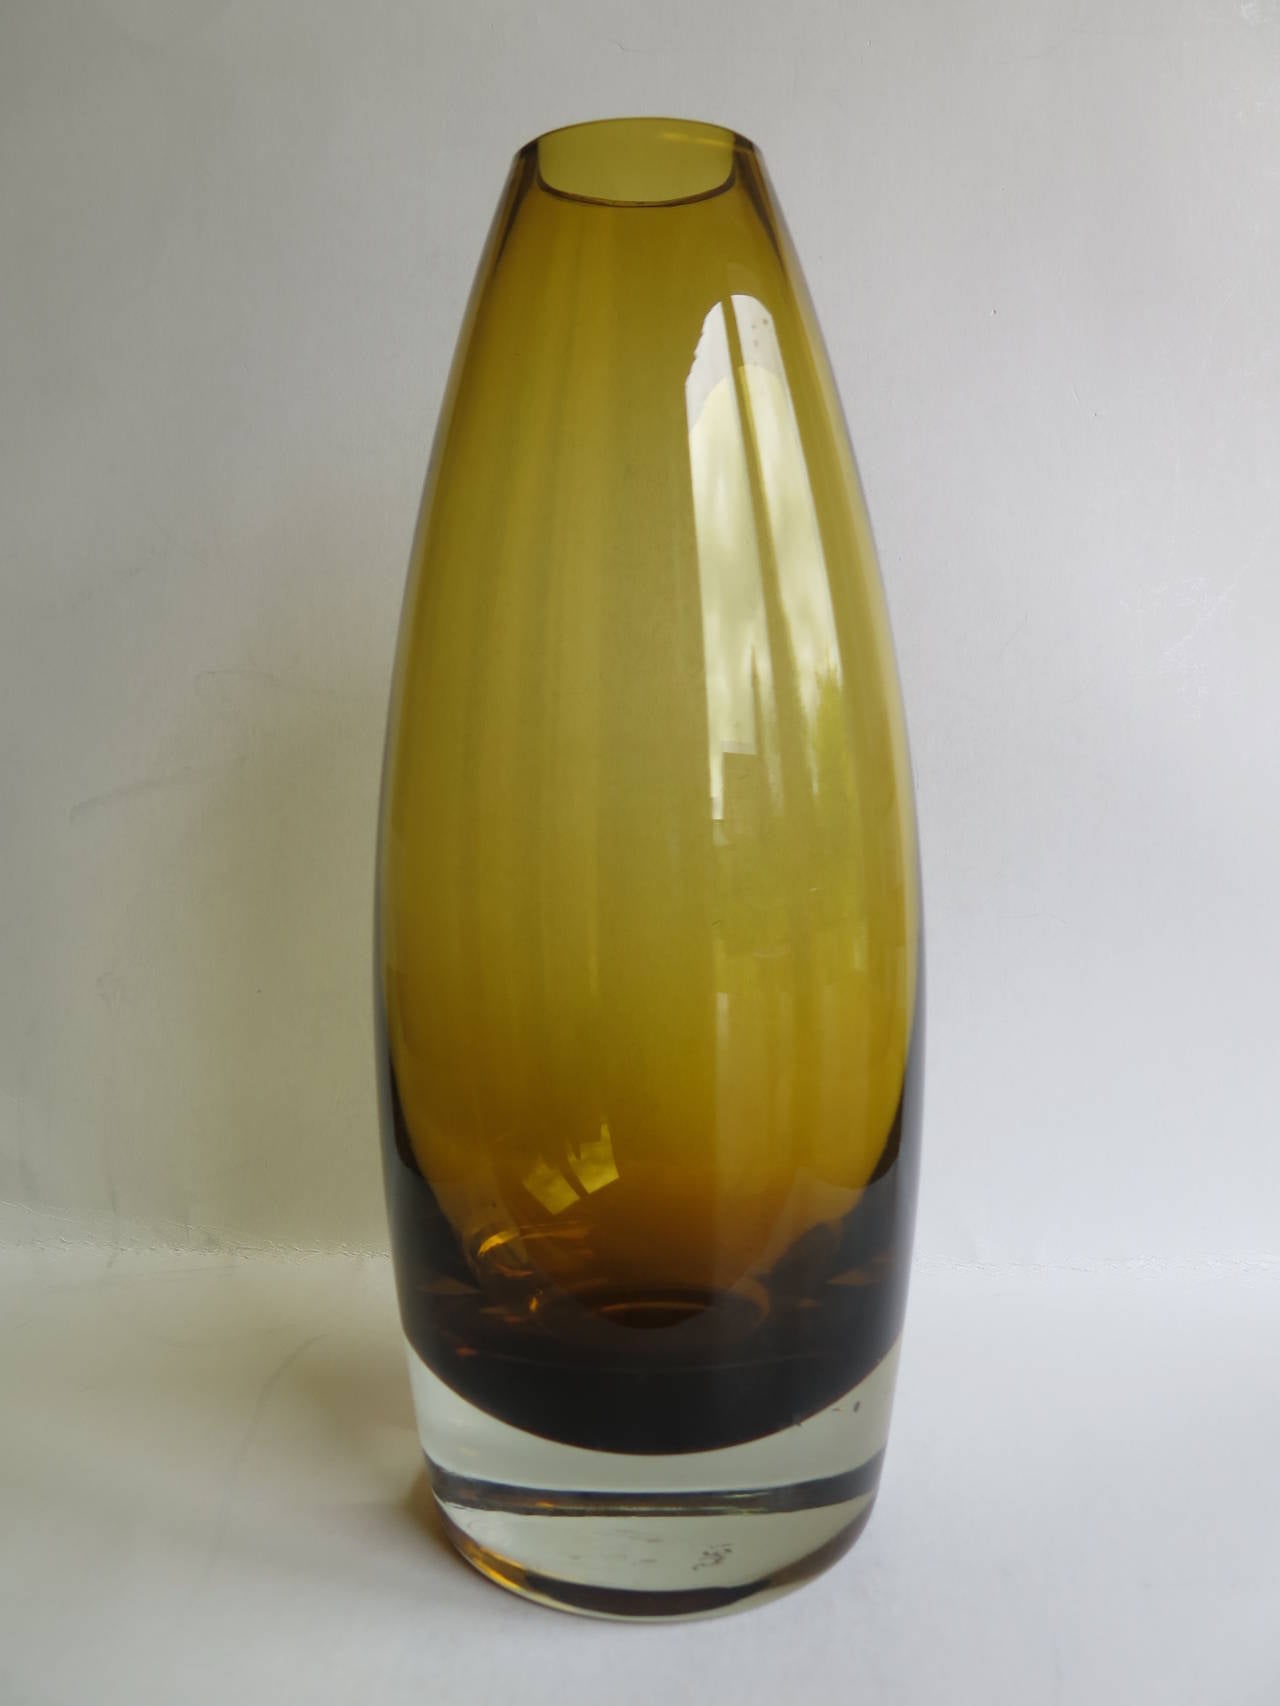 This is a mid-century Scandinavian-modern, Art glass vase, attributed to the designer Tamara Aladin, for the maker Riihimaen / Riihimaki Lasi Oy of Finland.

The vase has a lovely cylindrical tapering form in a cased Amber-Topaz Yellow and clear